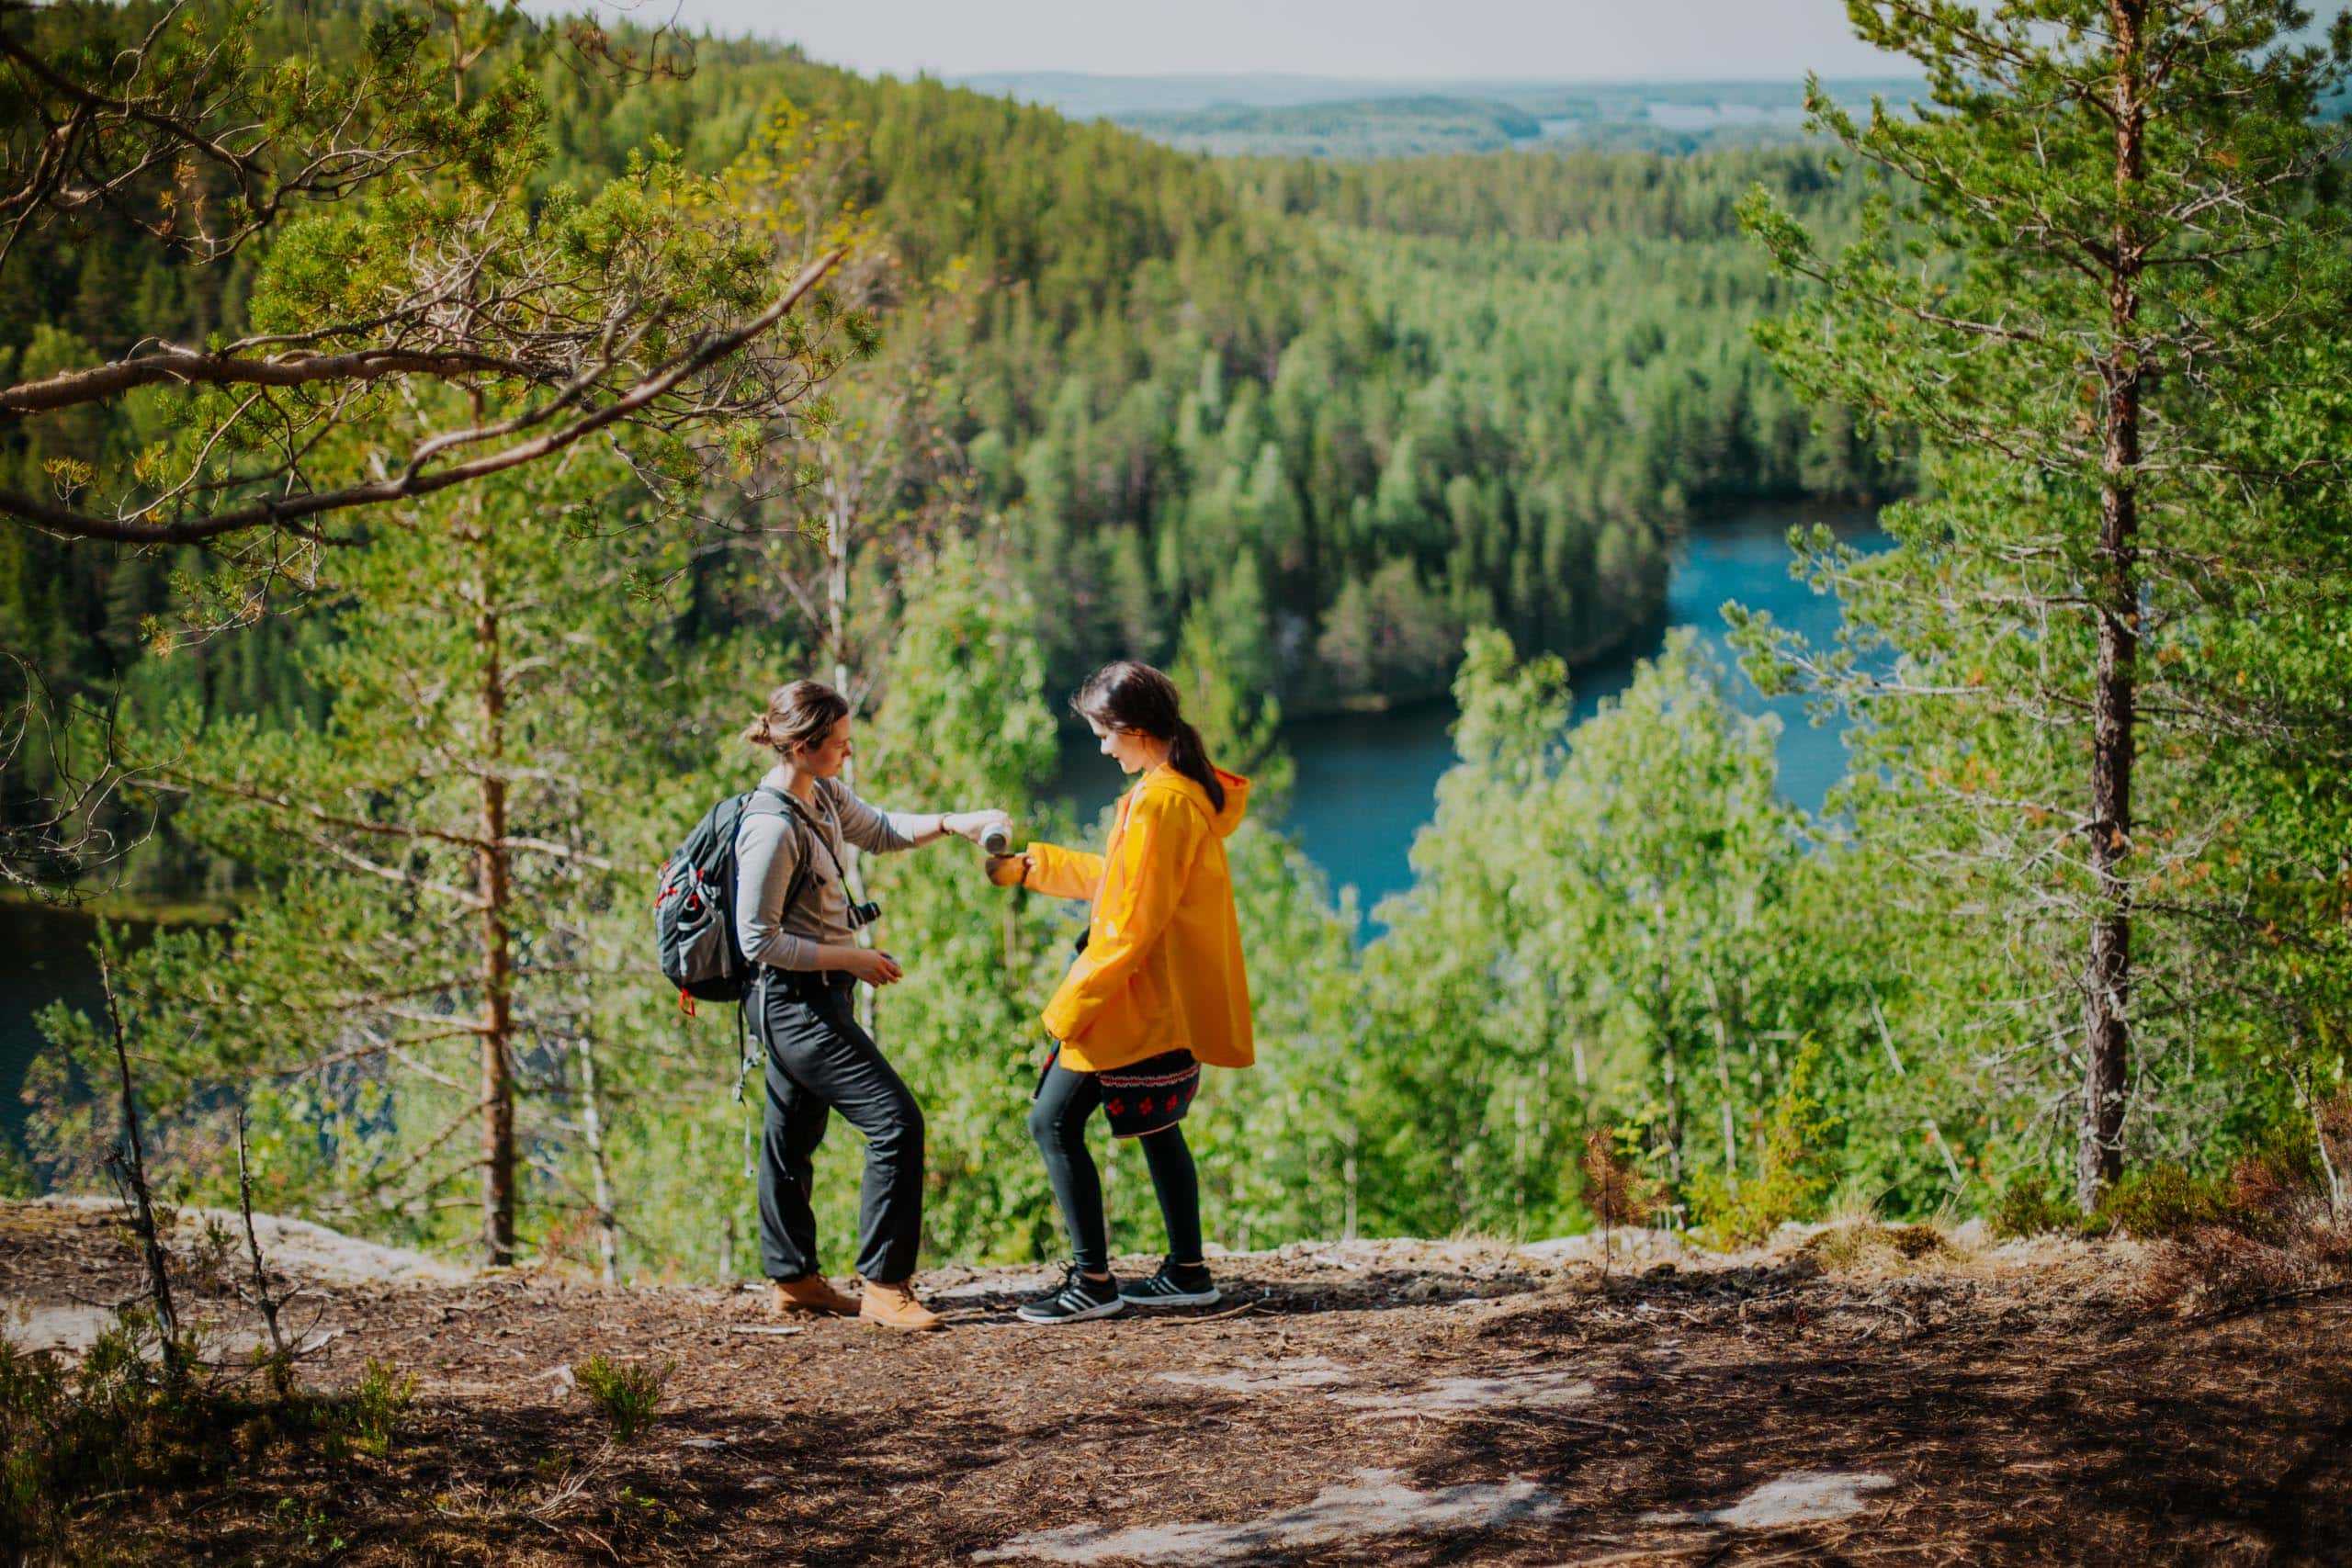 Two persons standing on a viewpoint. There is a forest and lake below.